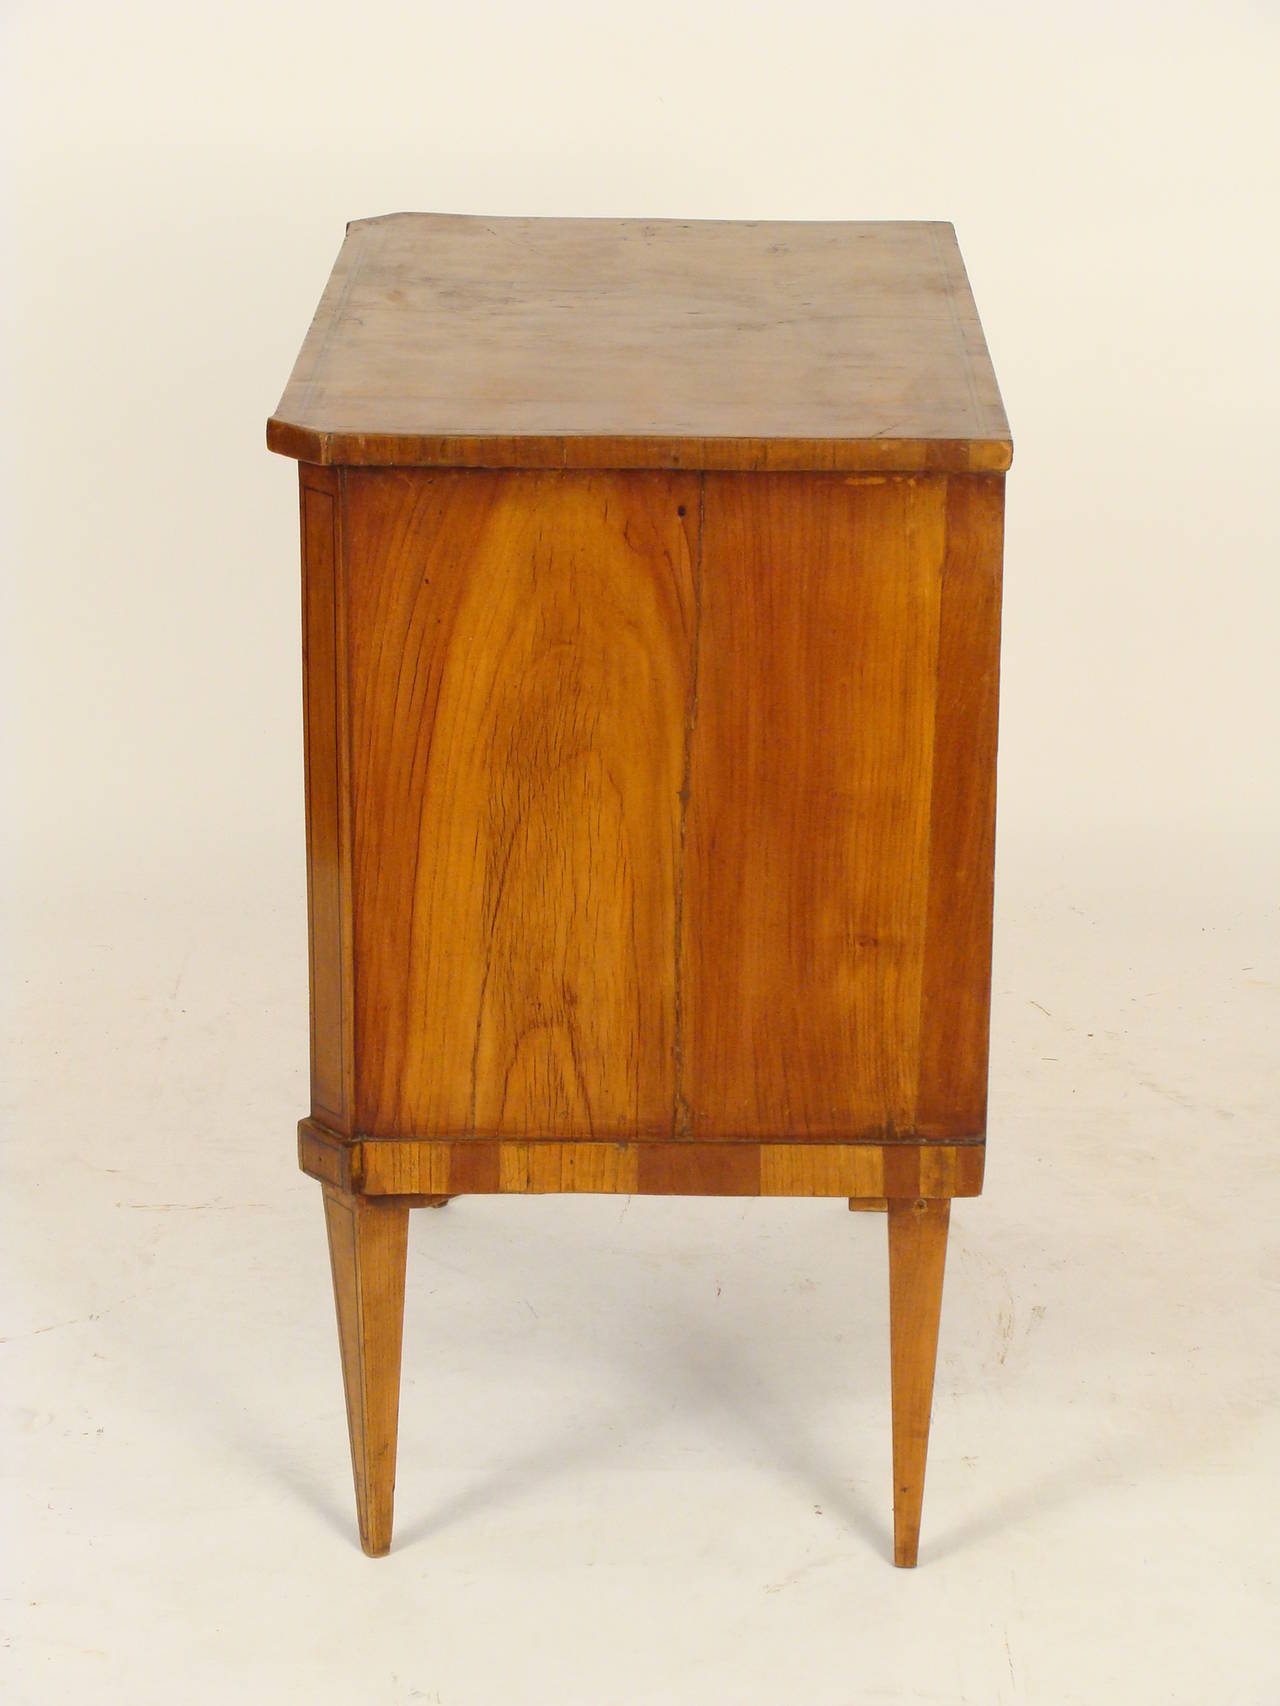 Continental directoire, fruit wood, small scale, two drawer commode, early 19th century. This is a hard to find small scale chest of drawers.